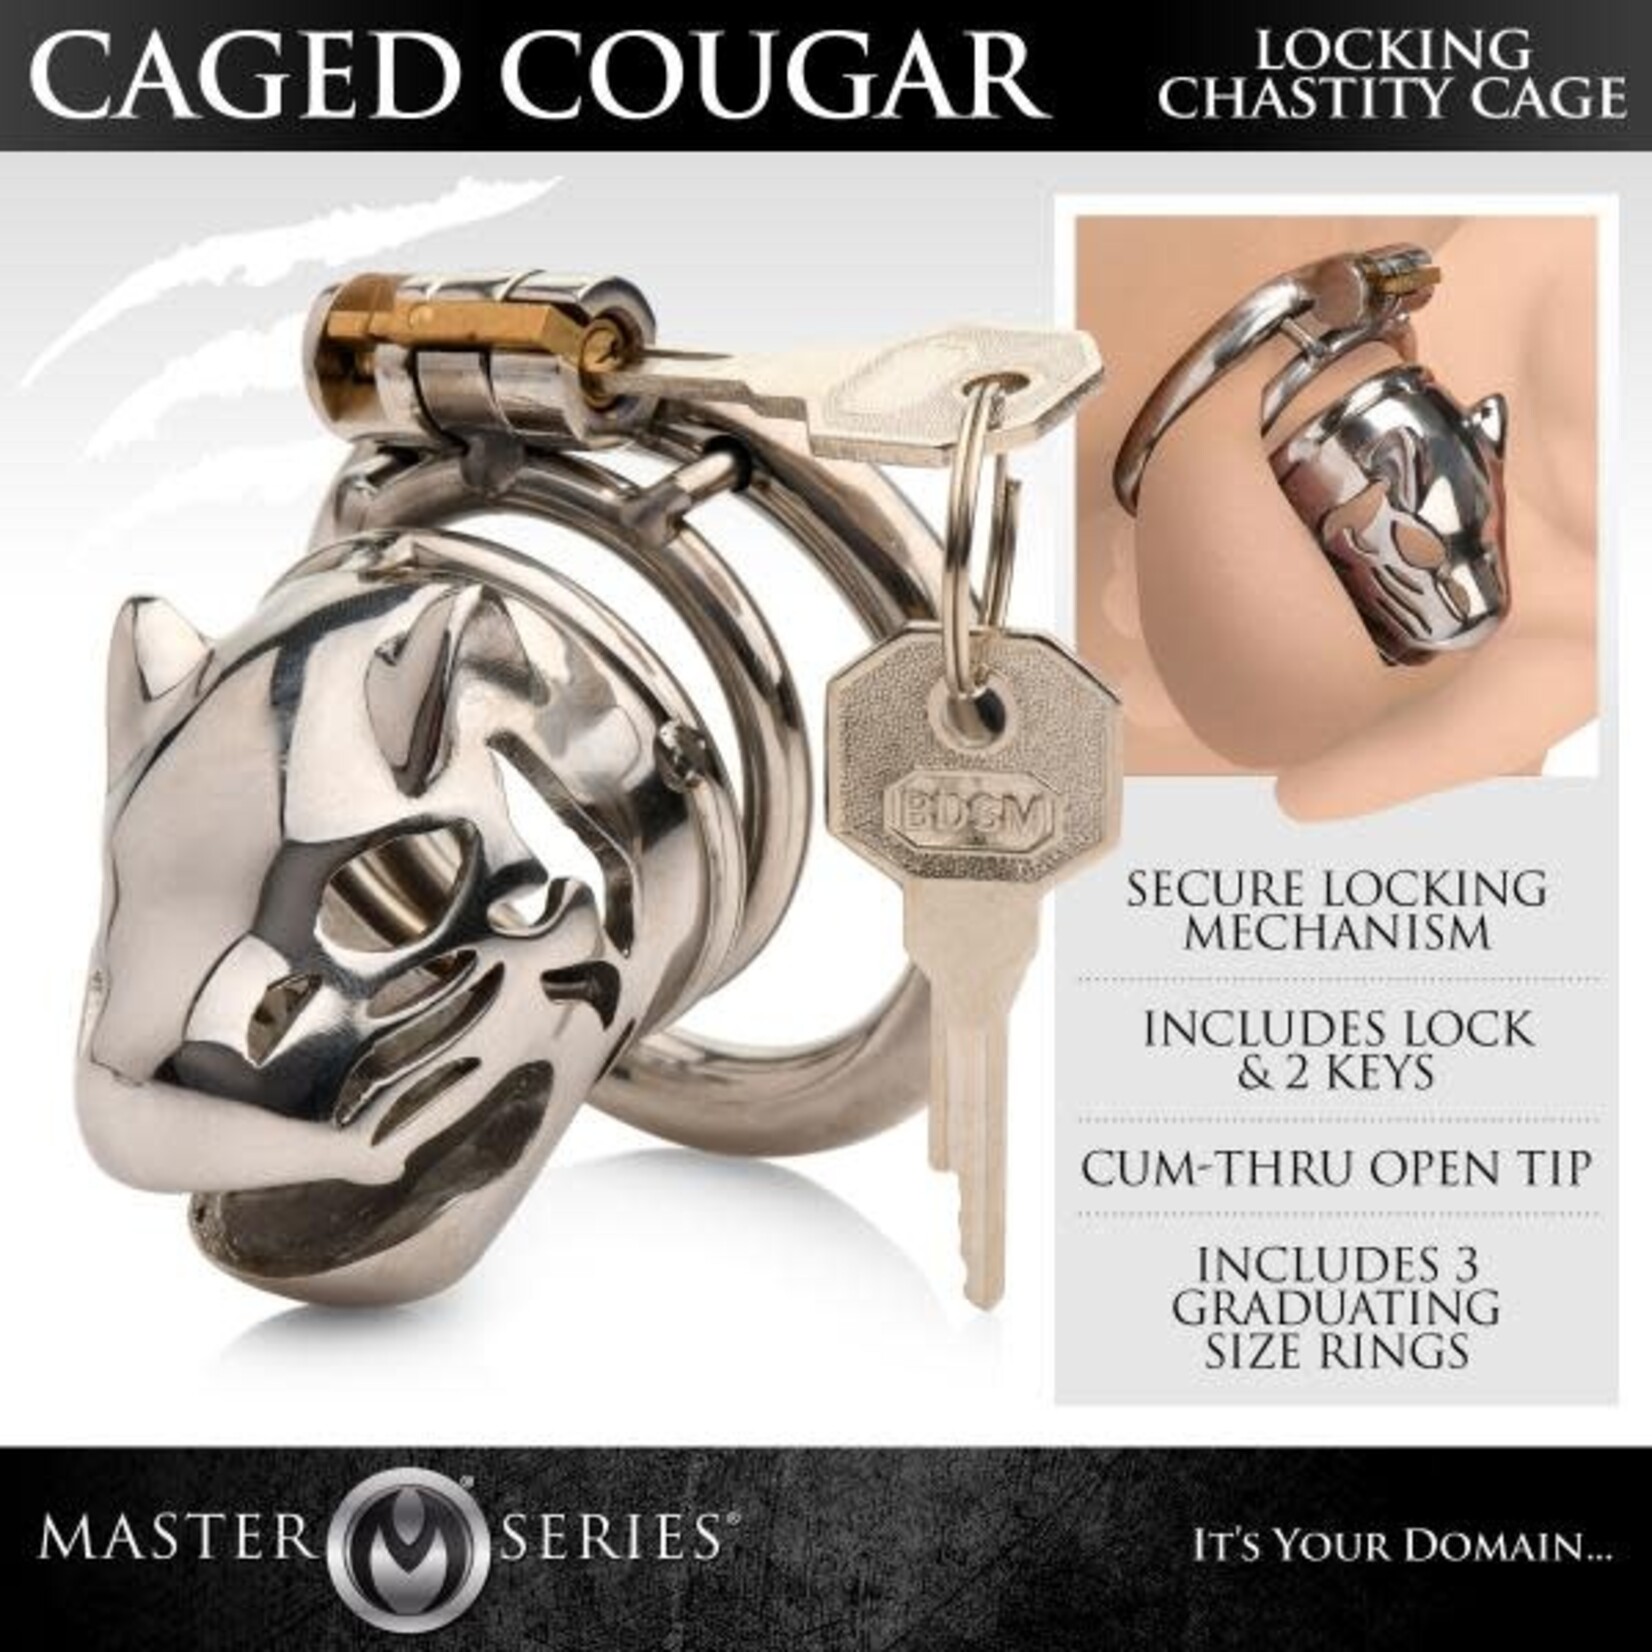 MASTER SERIES MASTER SERIES CAGED COUGAR LOCKING CHASTITY CAGE